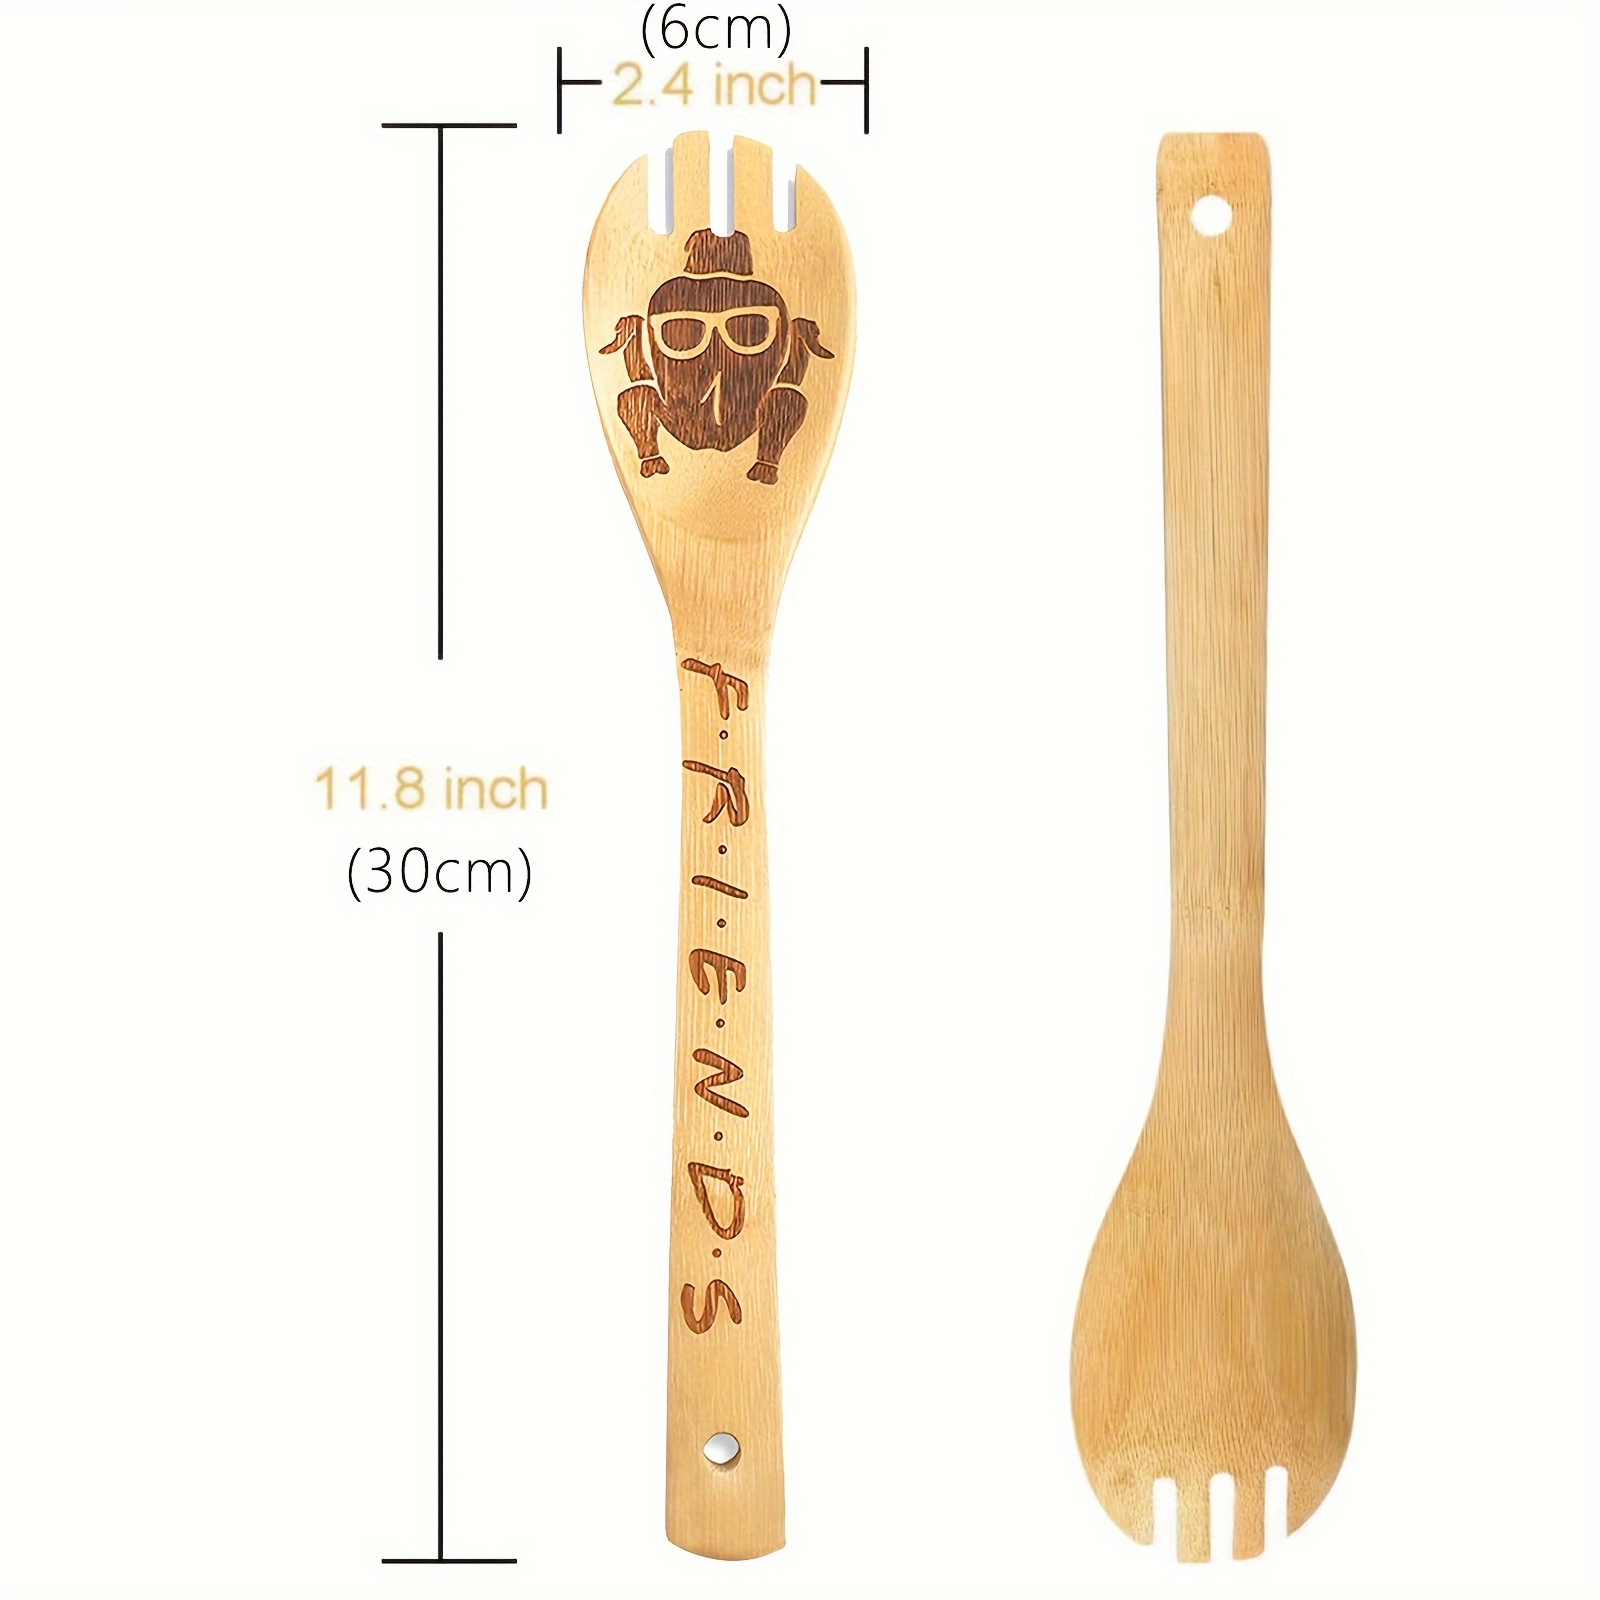 Kitchen Product Wooden Spoons Spatula Set Themed Cooking Utensils Non Stick  Carve Spoons Burned Cookware Kitchen Gadget Kit Housewarming Gift Chef  Present Funny Kitchen Decor Dinnerware Khaki 